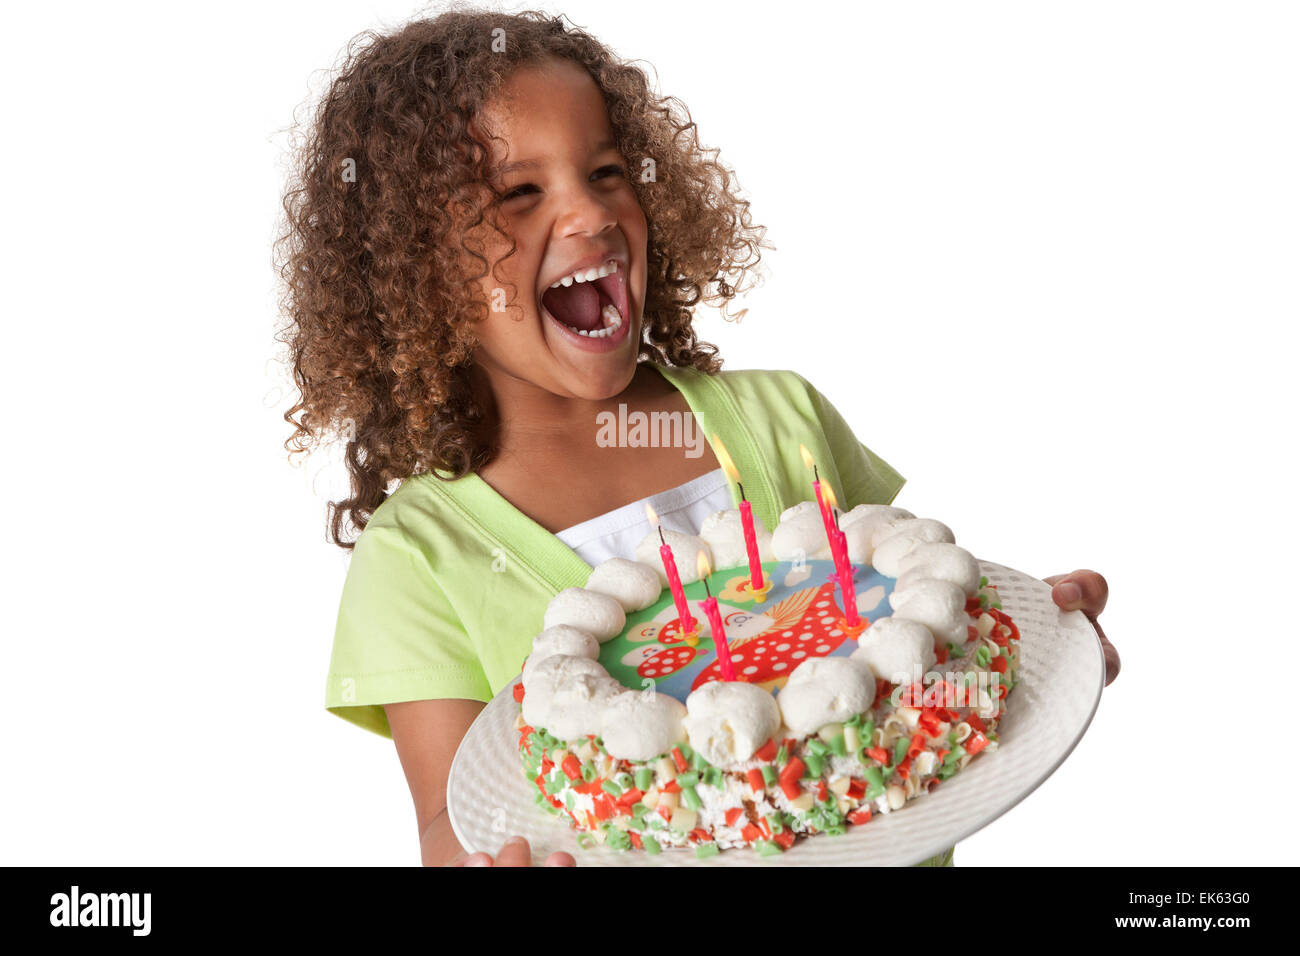 Five year old girl with a birthday cake with 5 candles laughing loud on white background Stock Photo